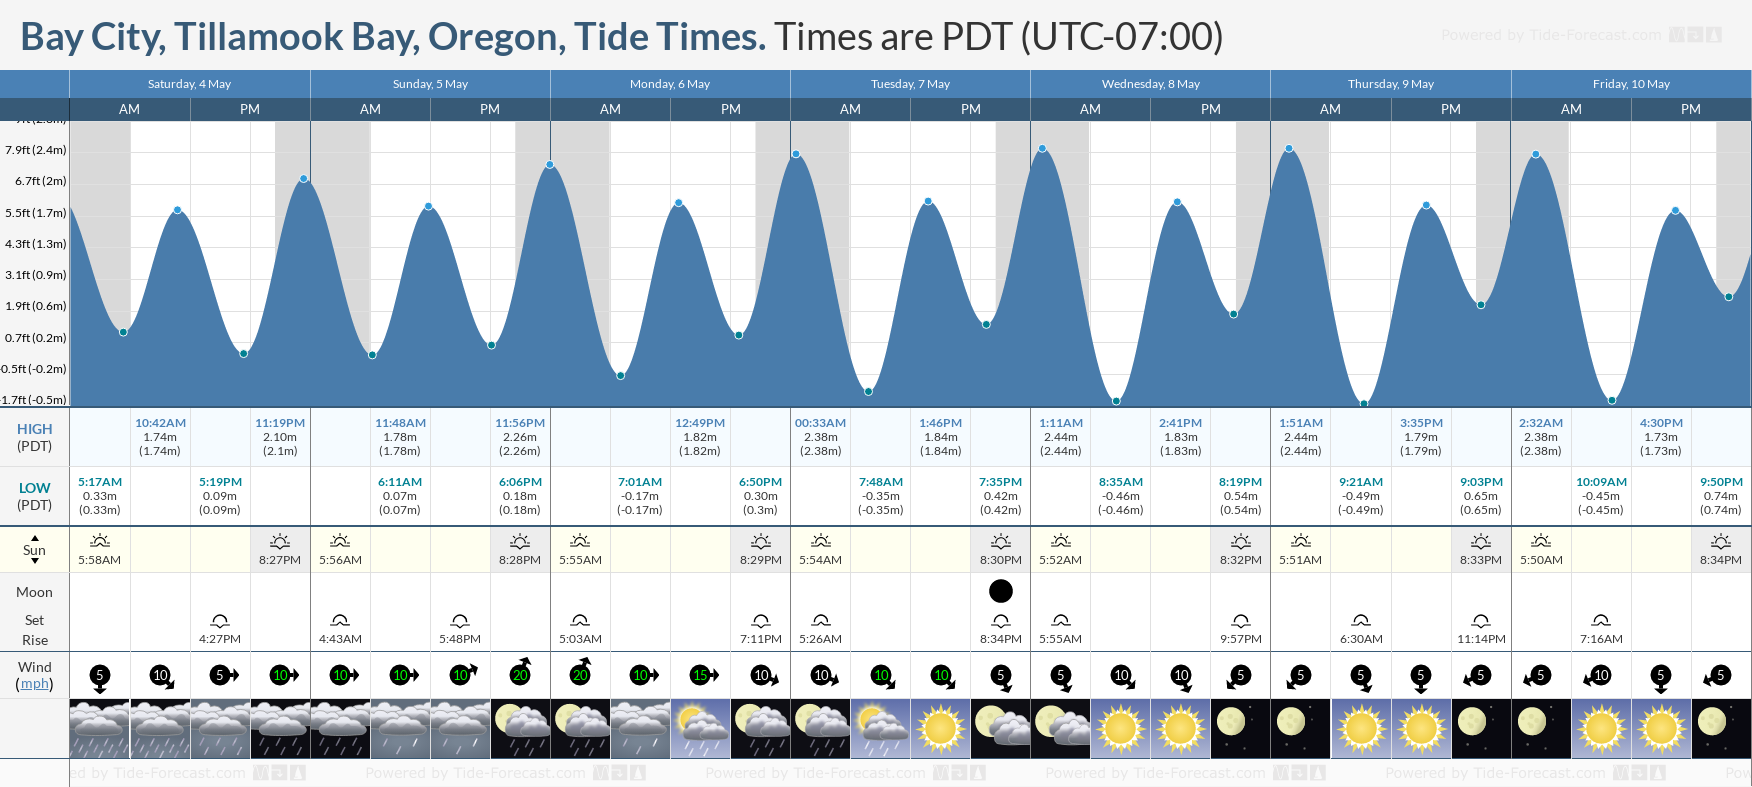 Bay City, Tillamook Bay, Oregon Tide Chart including high and low tide tide times for the next 7 days